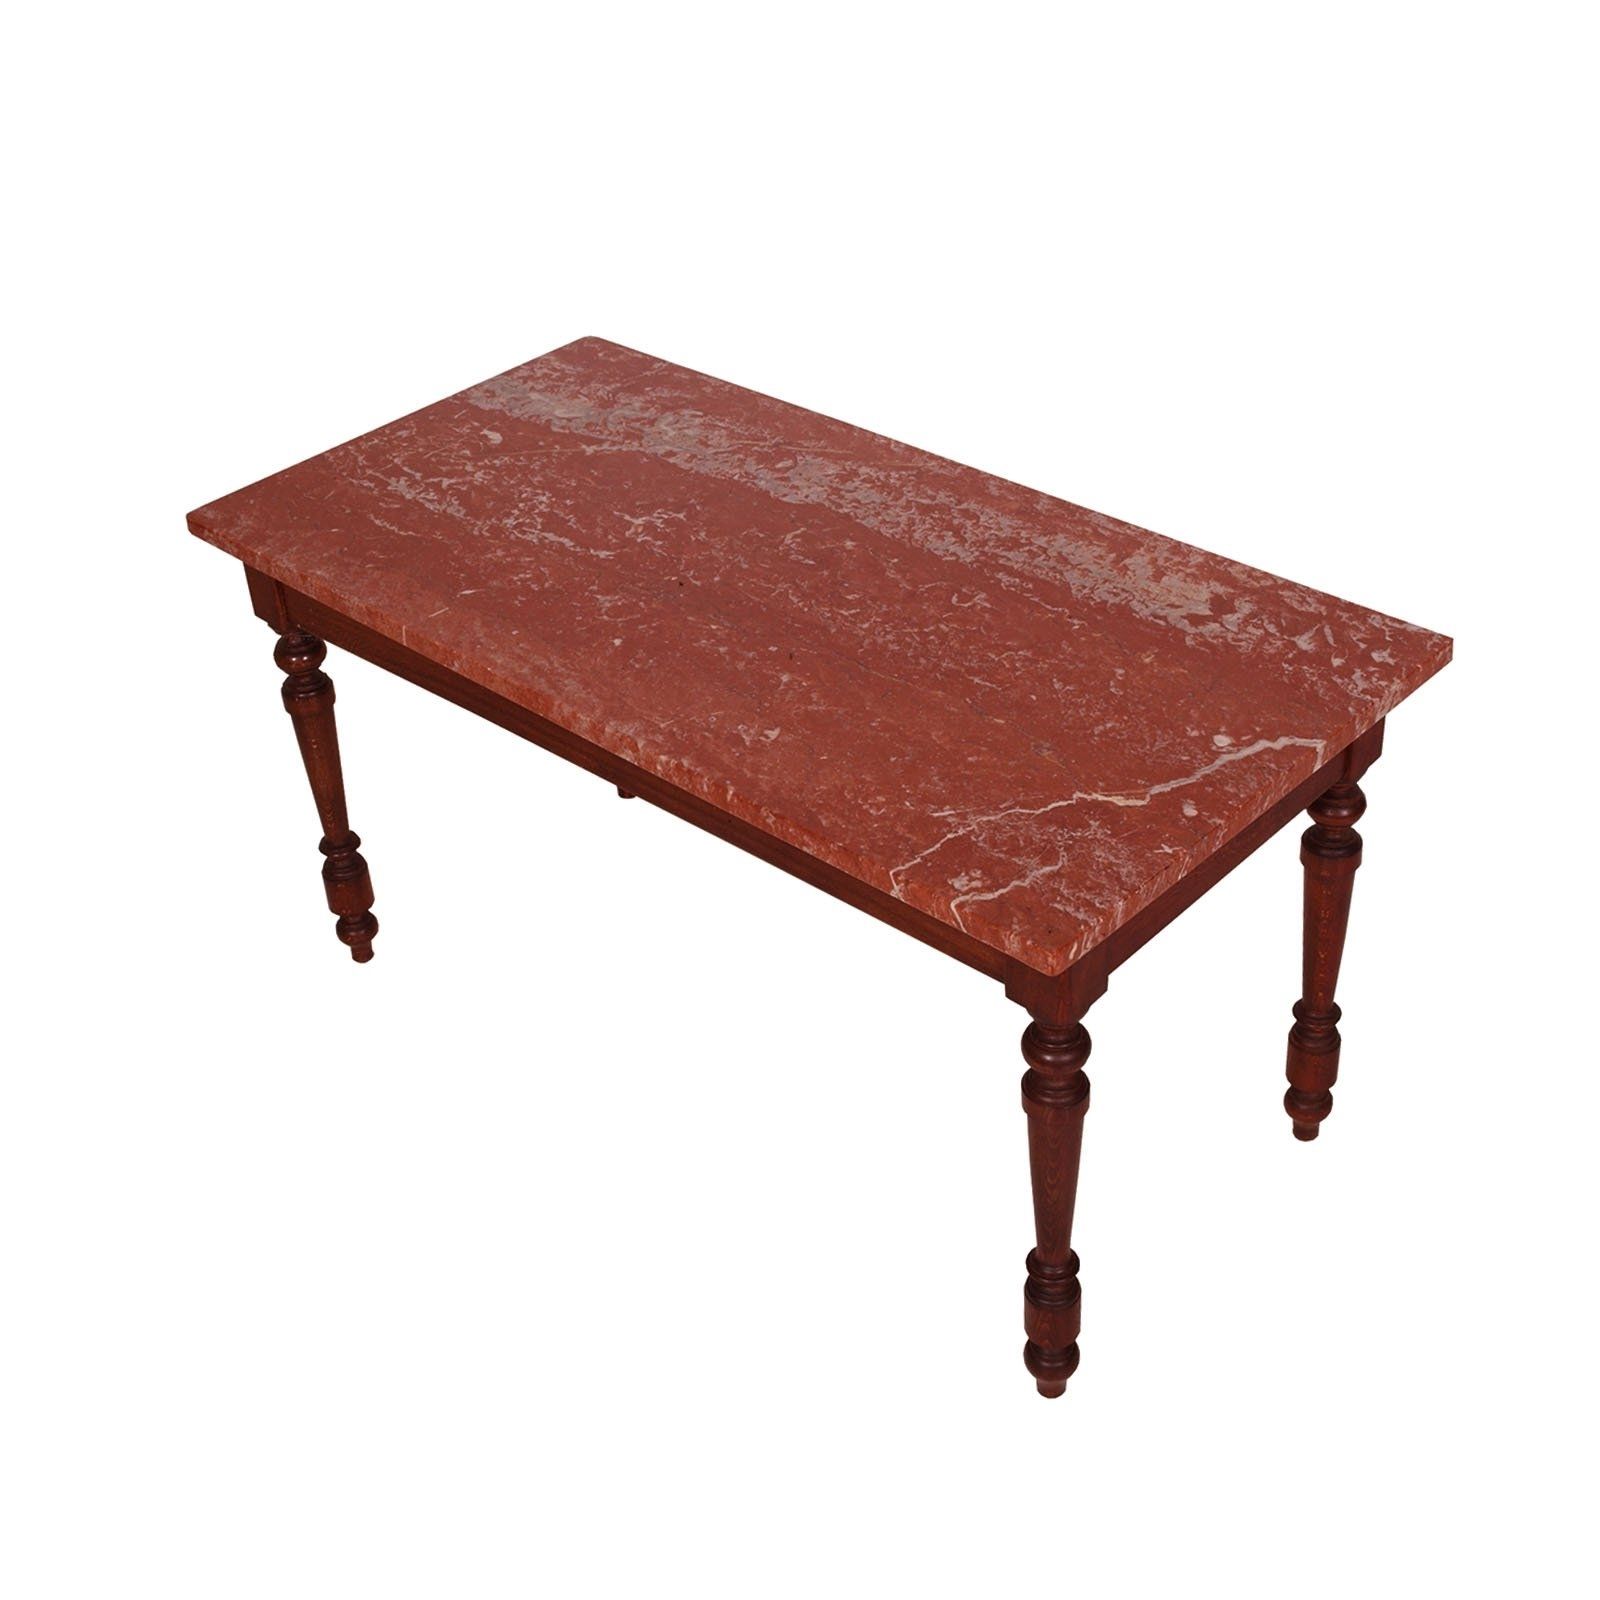 Most Recently Released Verona Cocktail Tables Pertaining To Coffee Centre Table Renaissance With Top Verona's Marble (View 11 of 20)